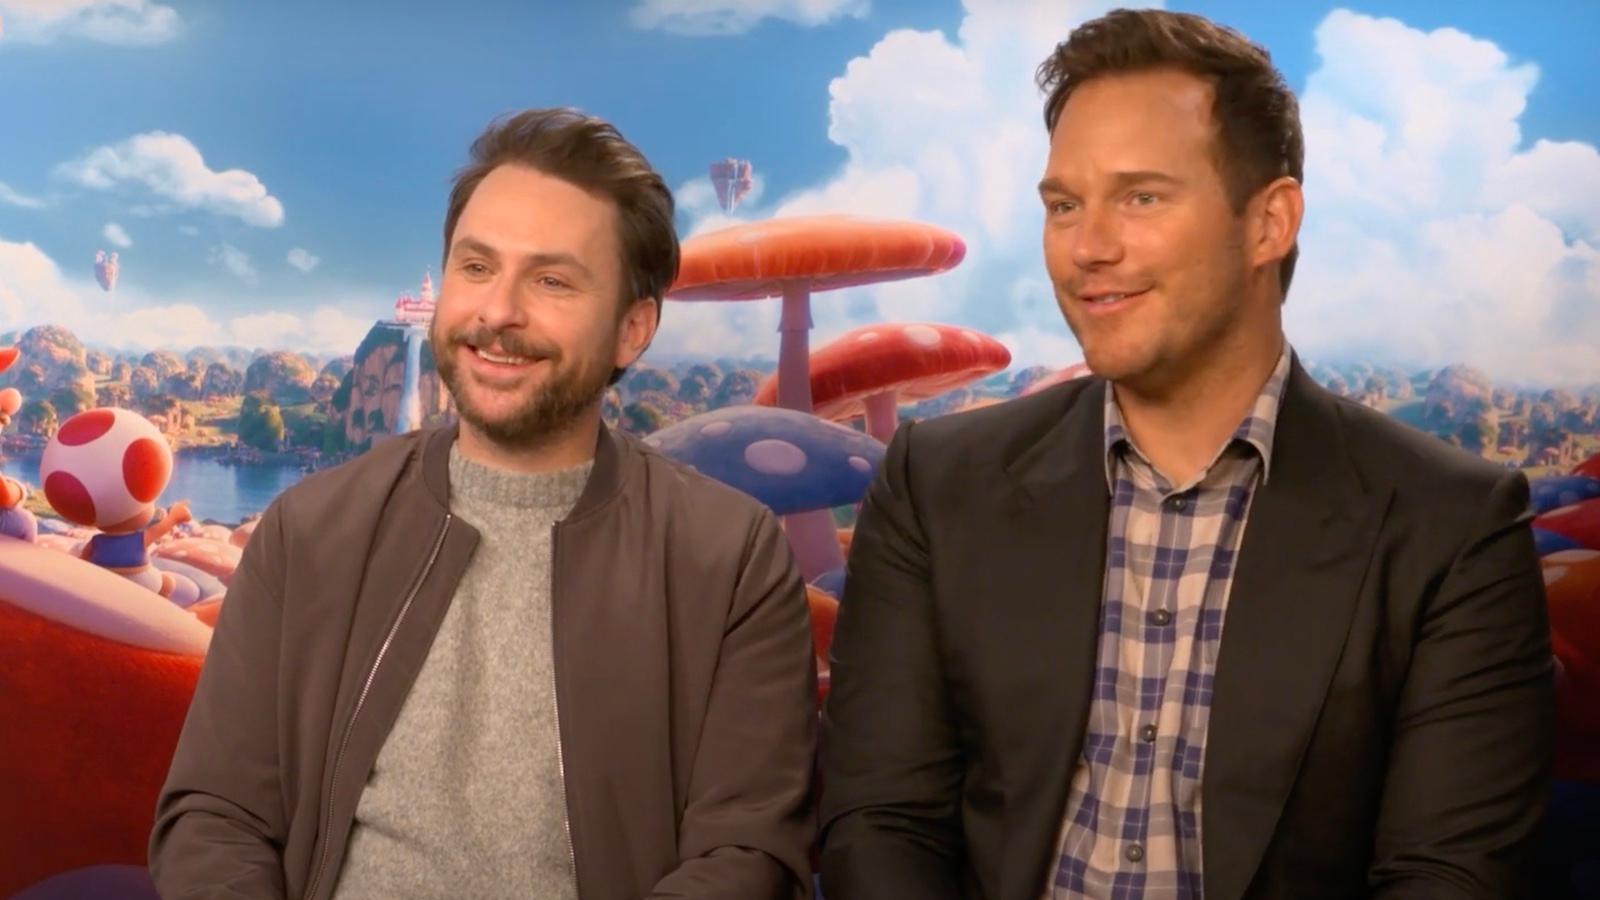 Super Mario Bros: The Movie - Why Charlie Day Is Actually The